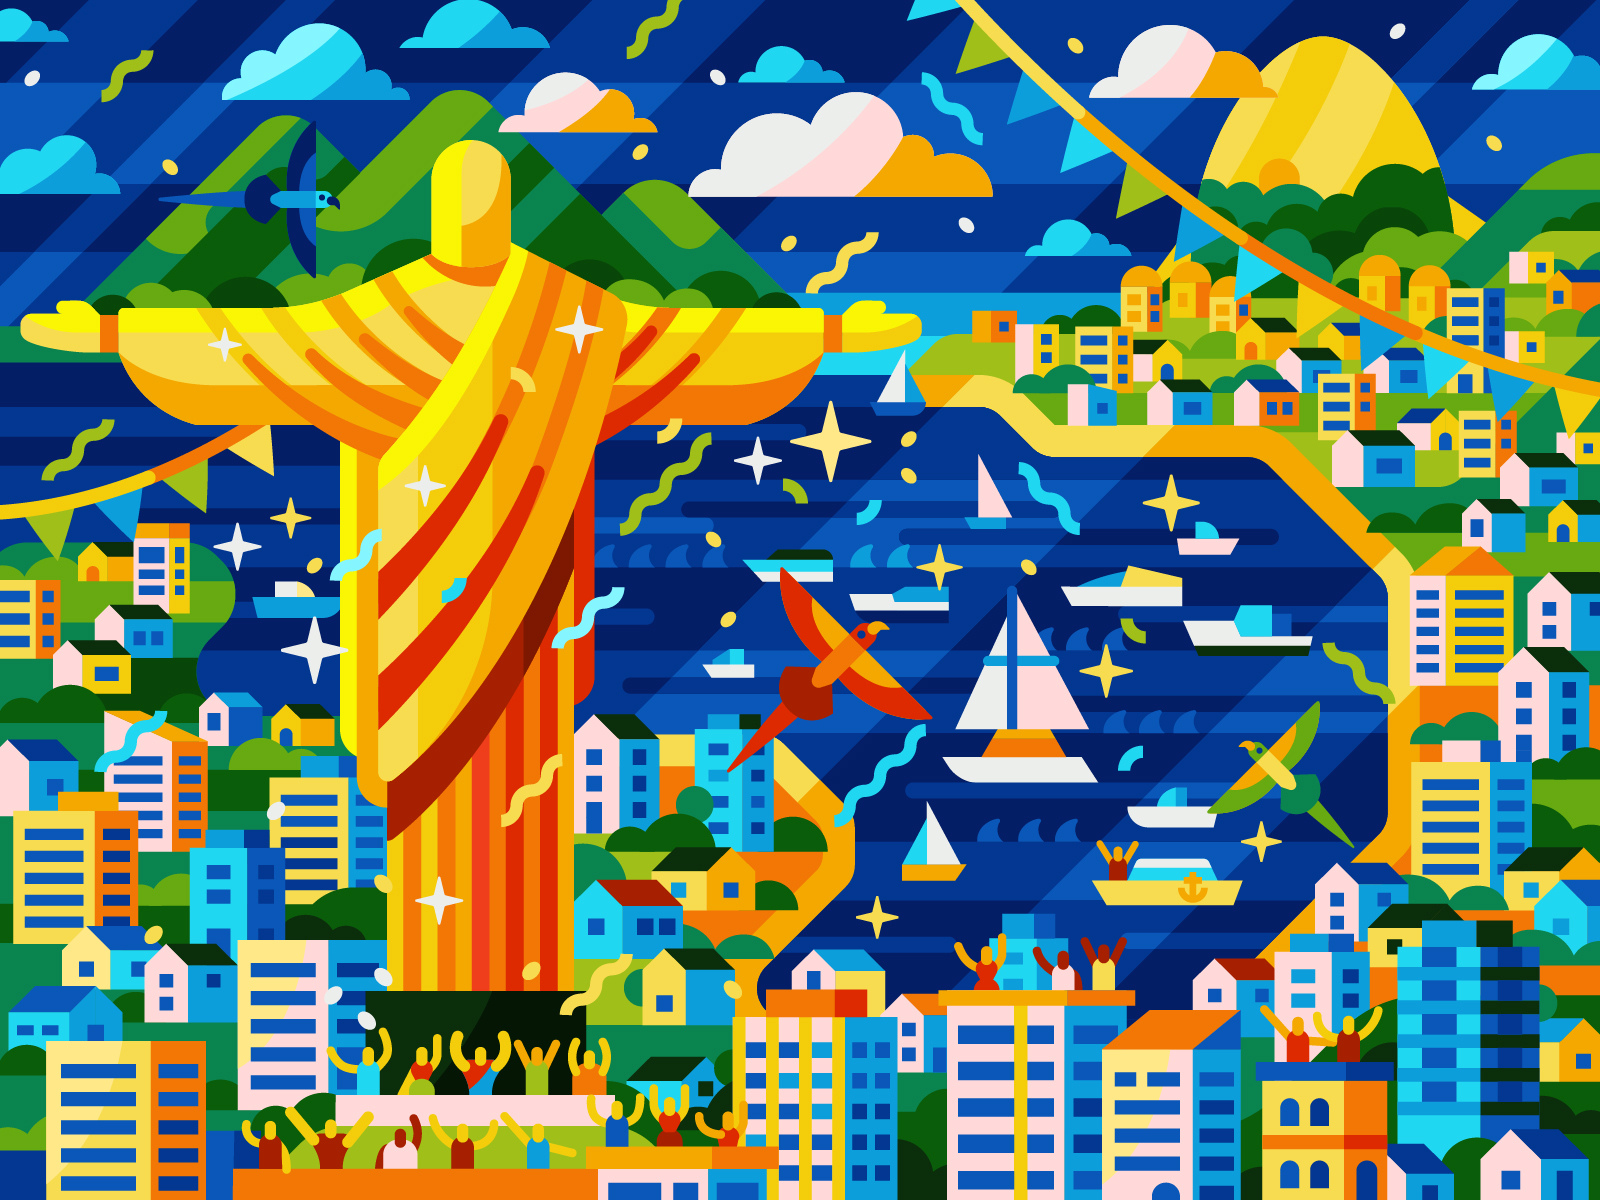 Rio De Janeiro adobe illustrator brasilia christ christ the redeemer city flat houses illustration painting painting by numbers port rio town vector